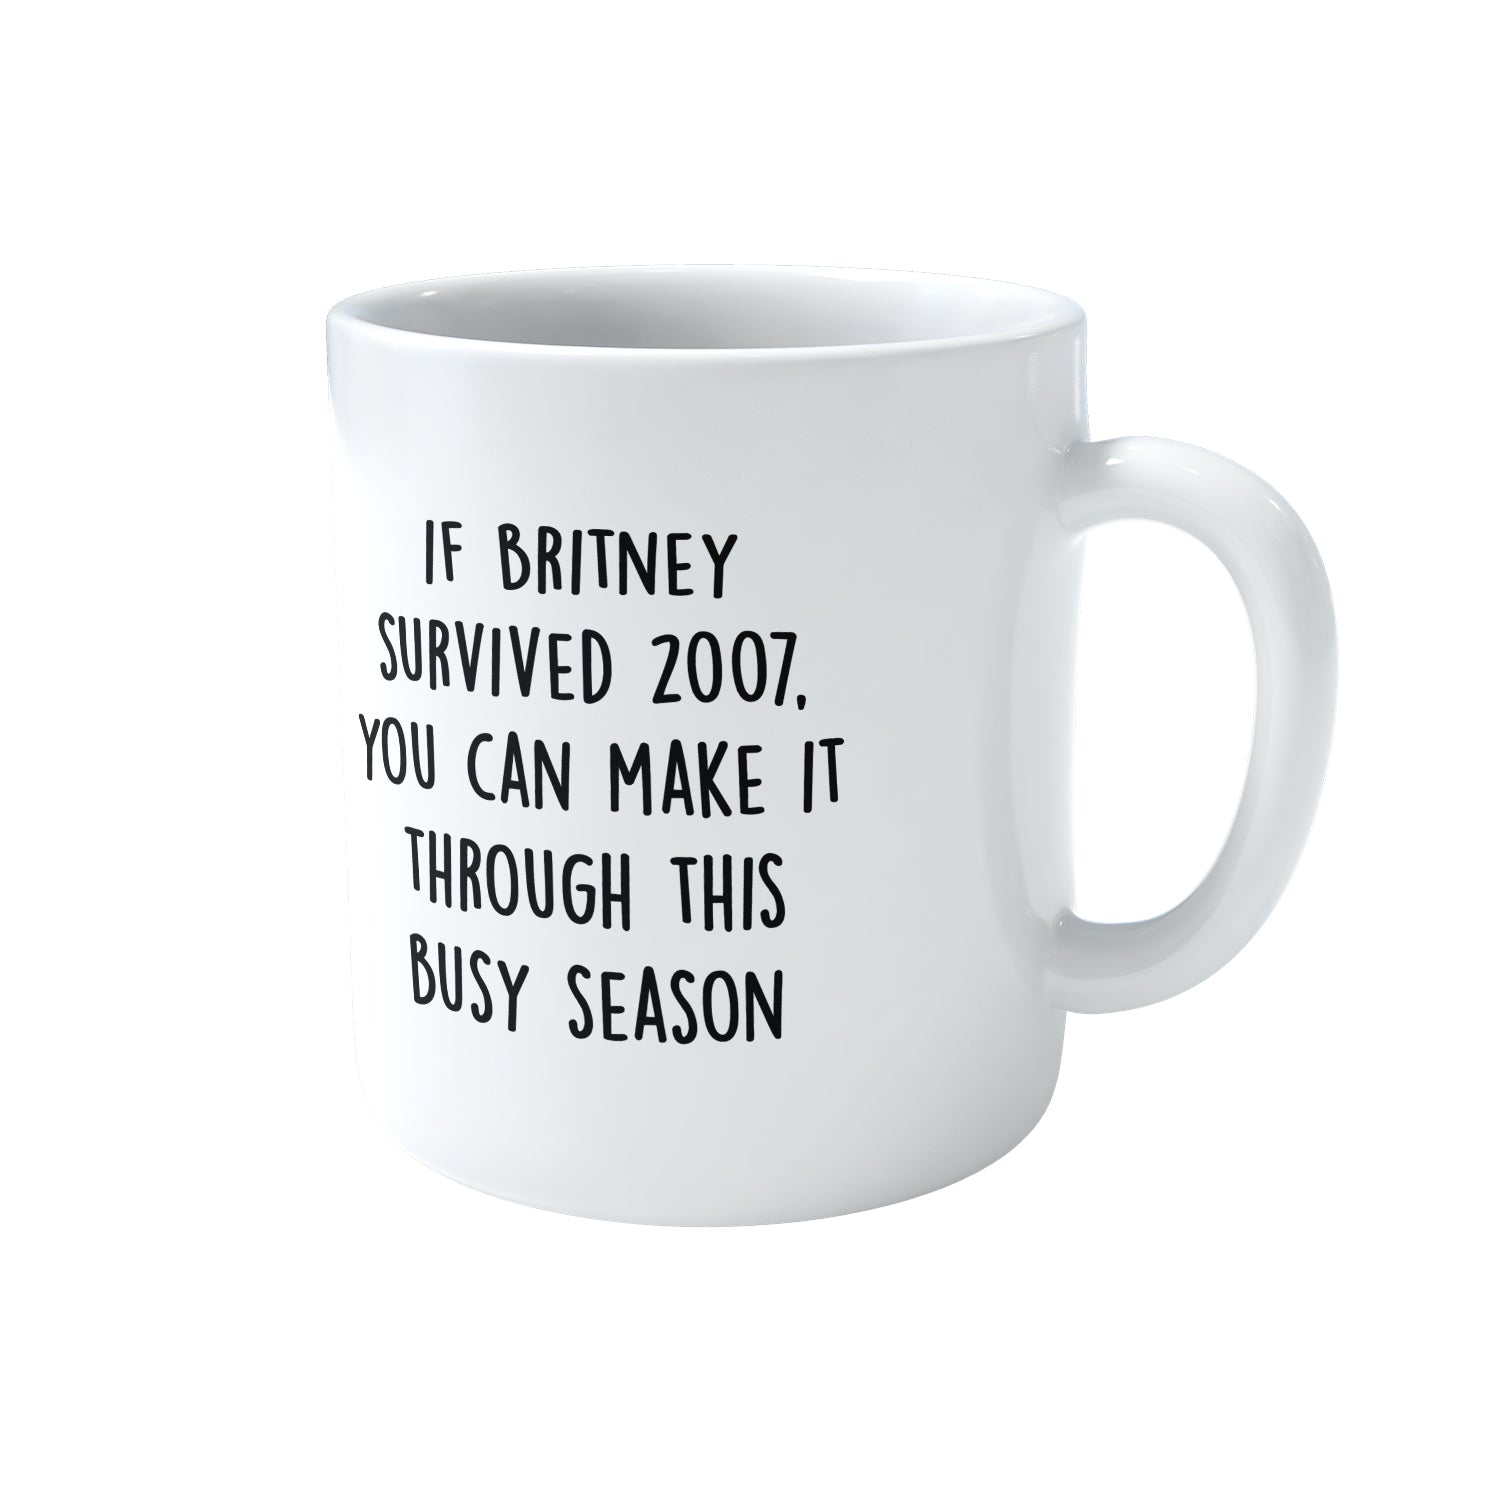 If Britney survived 2007, you can make it through this busy season Mug